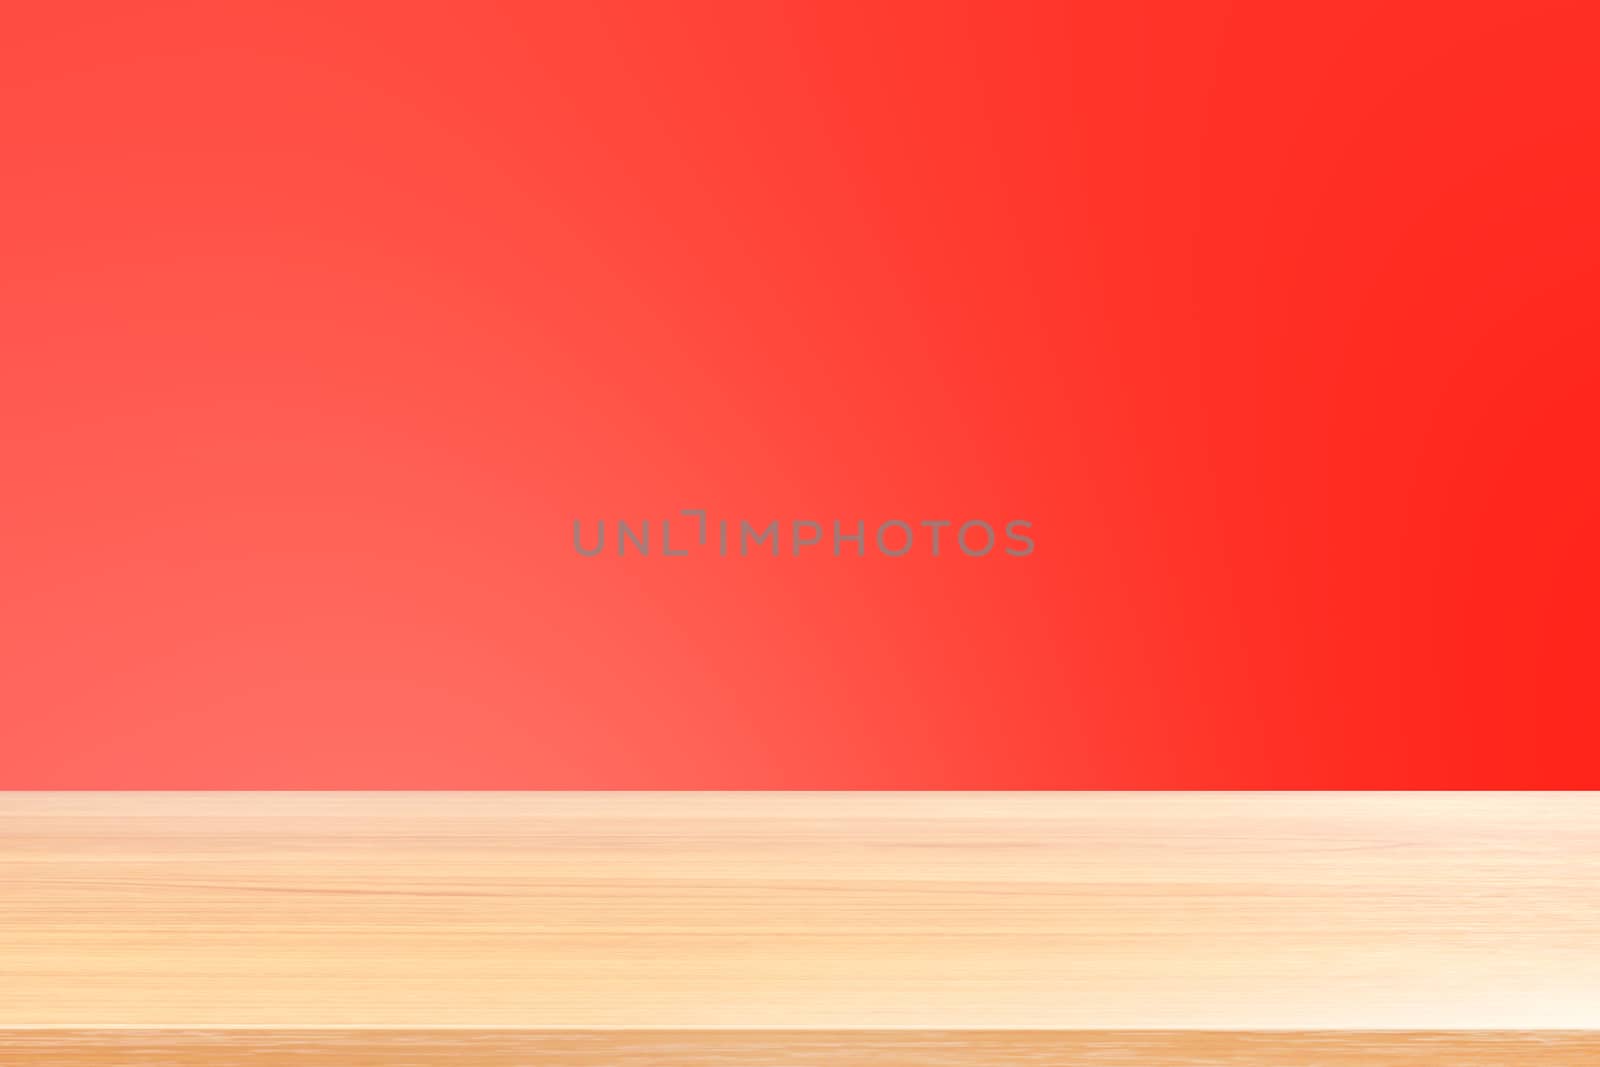 empty wood table floors on gradient red soft background, wood table board empty front colorful gradient red, wooden plank blank on light red gradient for display products or banner advertising by cgdeaw